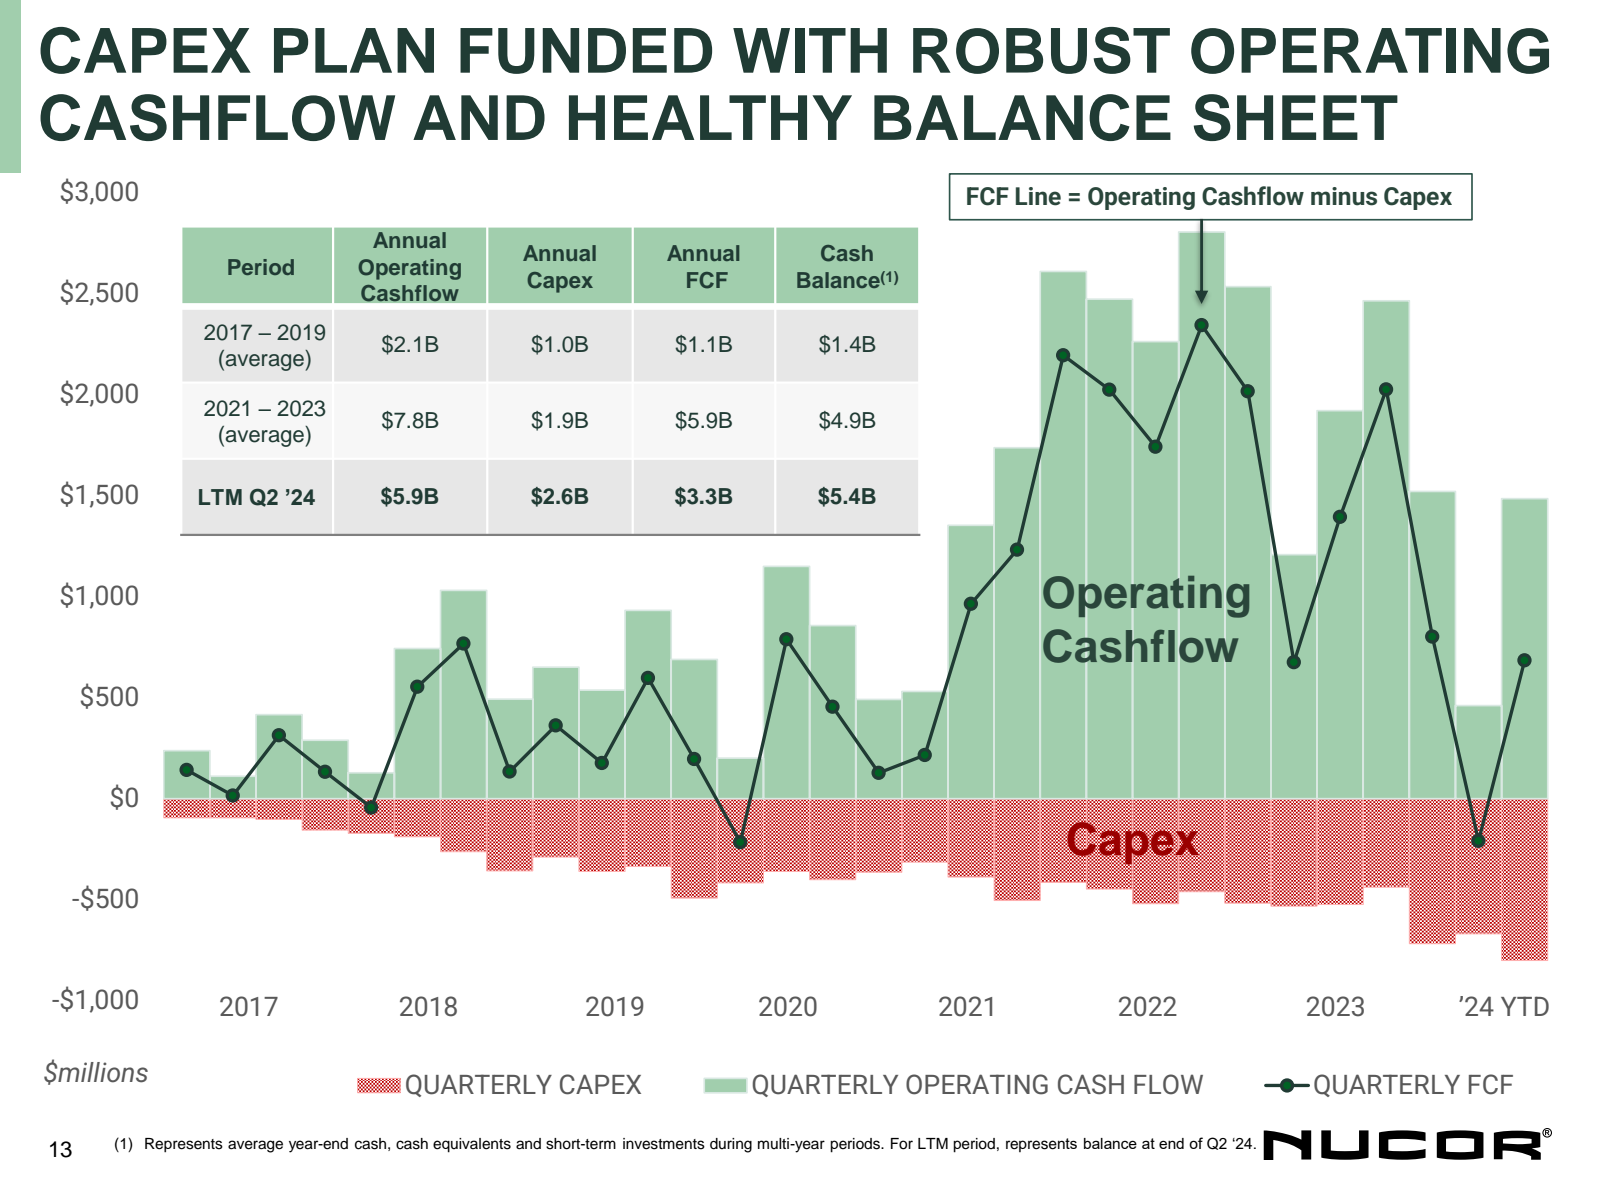 CAPEX PLAN FUNDED WI